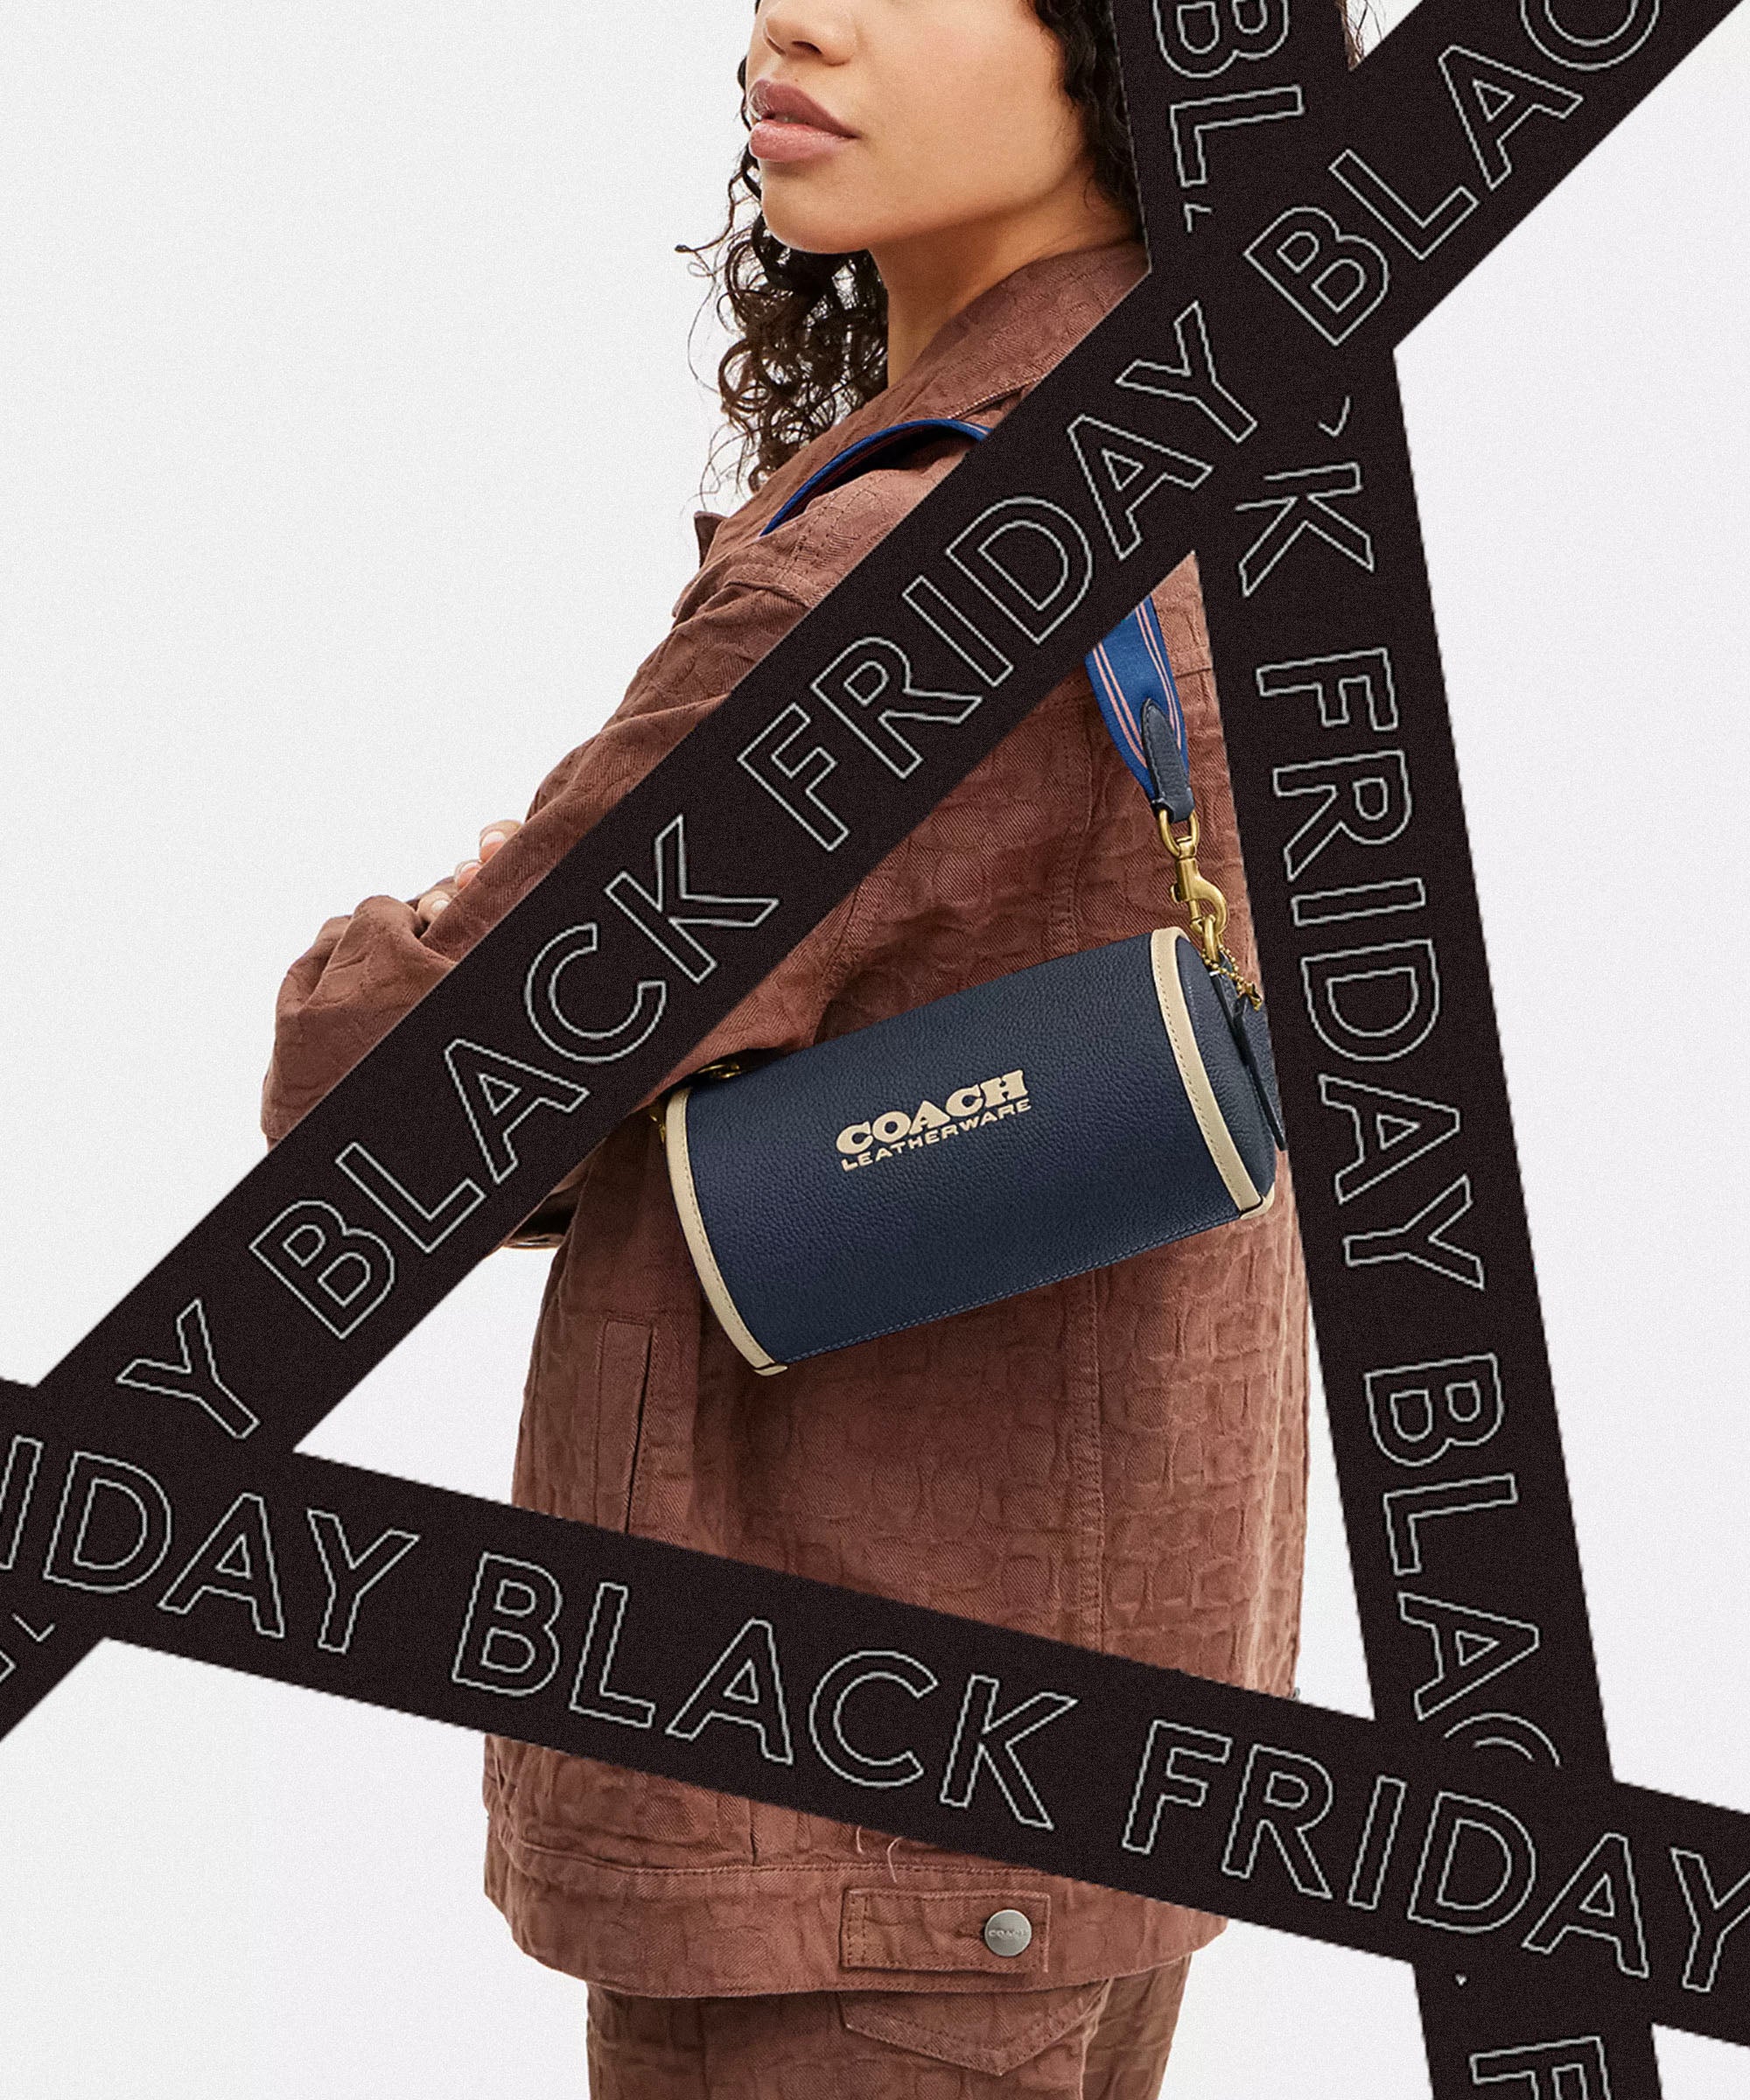 Coach’s Early Black Friday Sale Is Here — Your New Statement Bag Is A Click Away